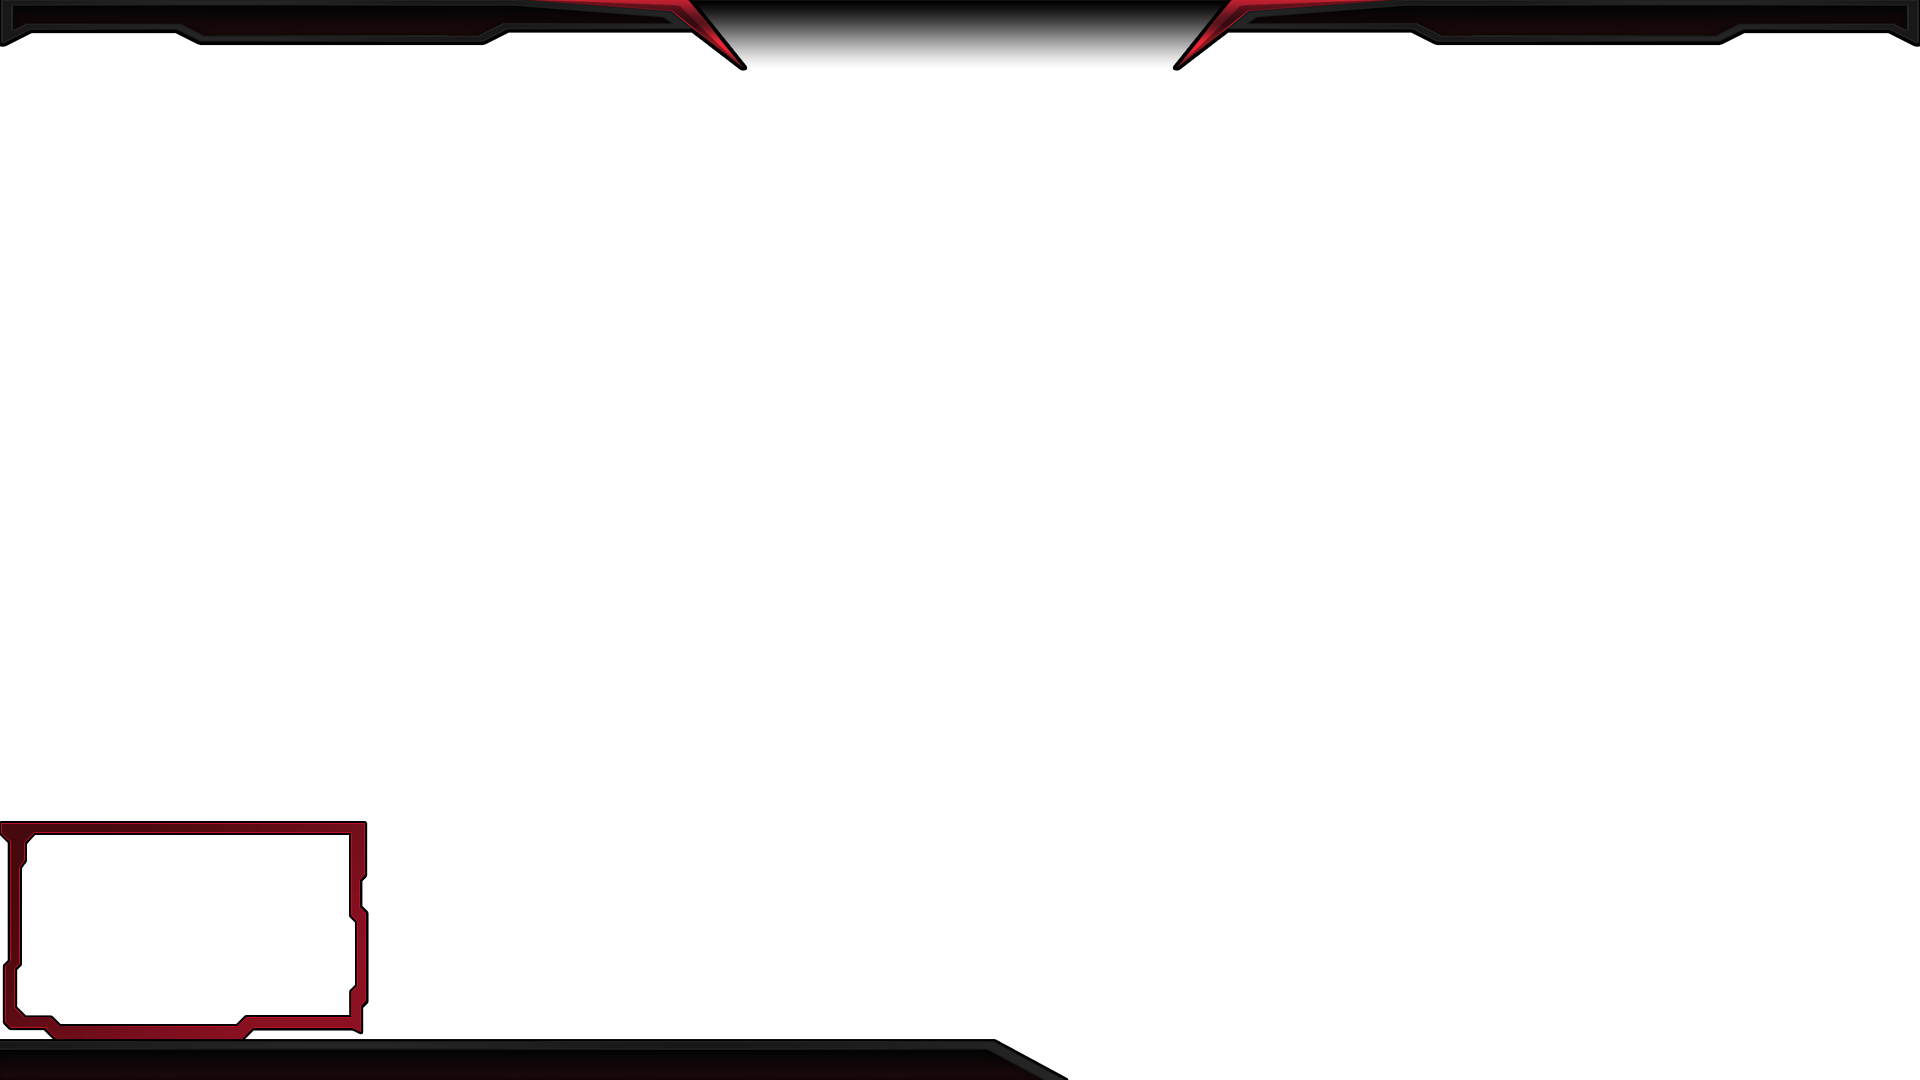 1920-x-1080-88-twitch-overlay-template-wow-1920x1080-png-clipart-download